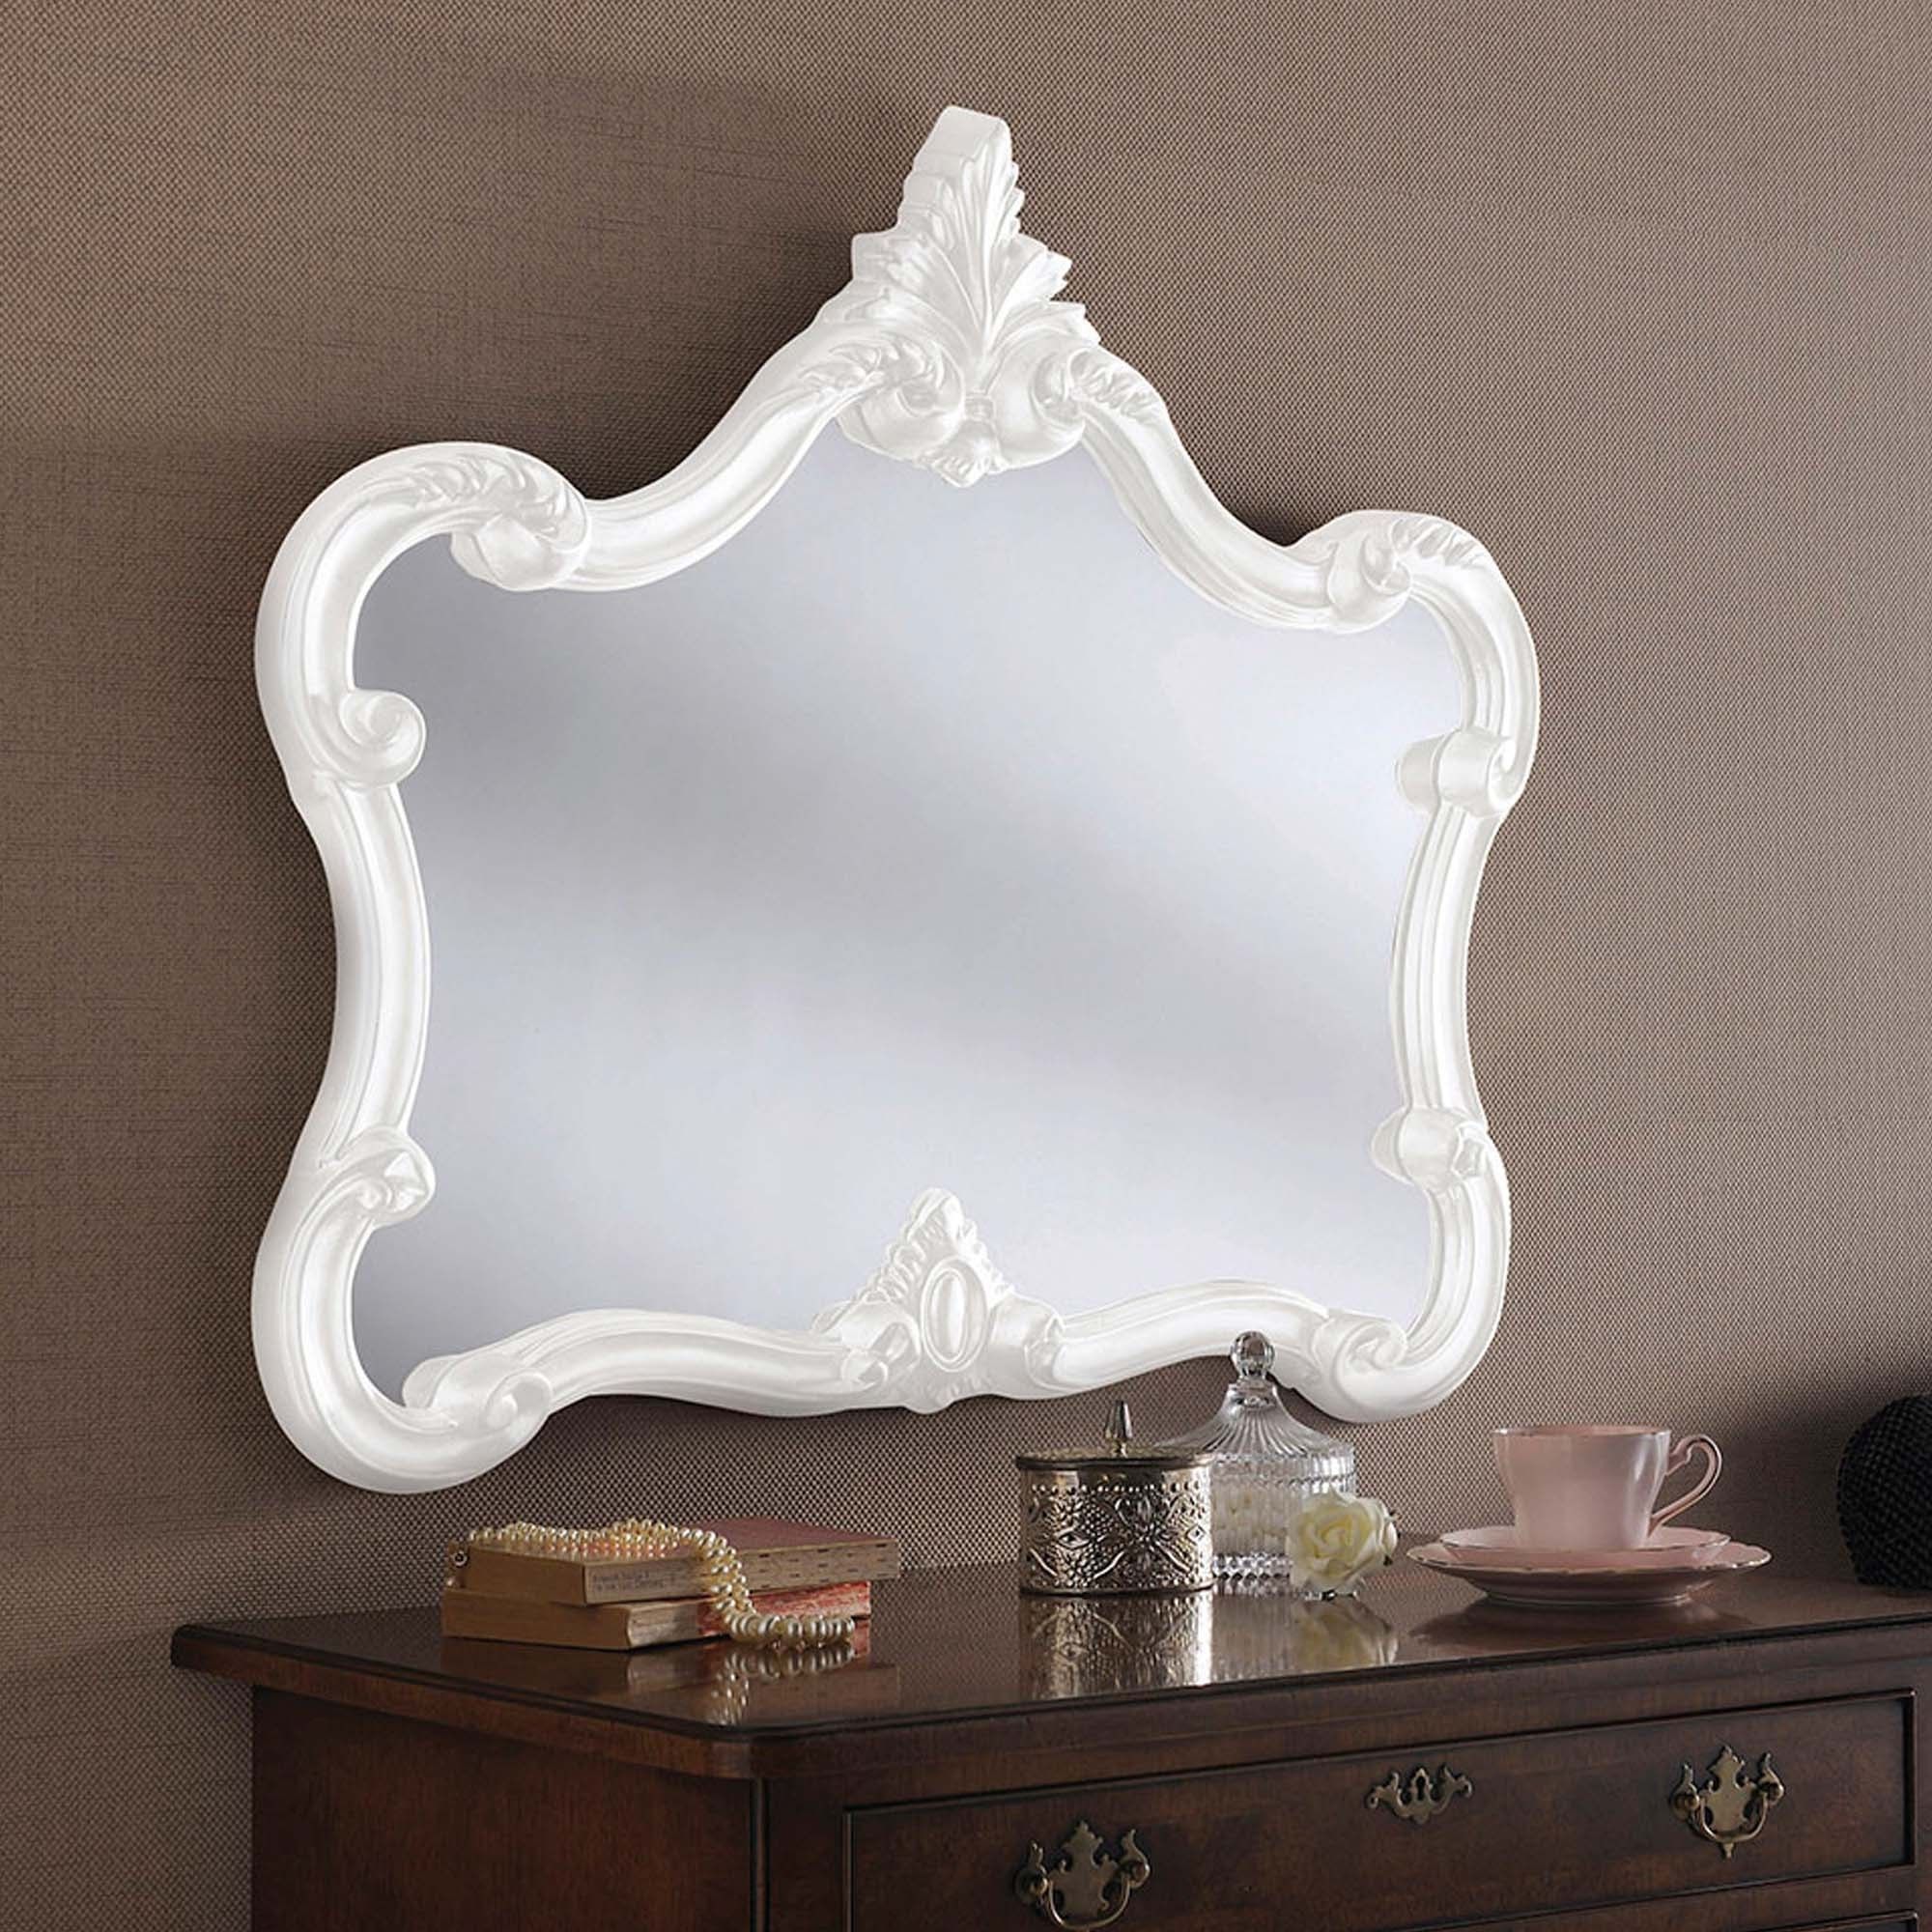 Antique French Style White Ornate Wall Mirror | Wall Mirrors Within Antiqued Glass Wall Mirrors (View 5 of 15)